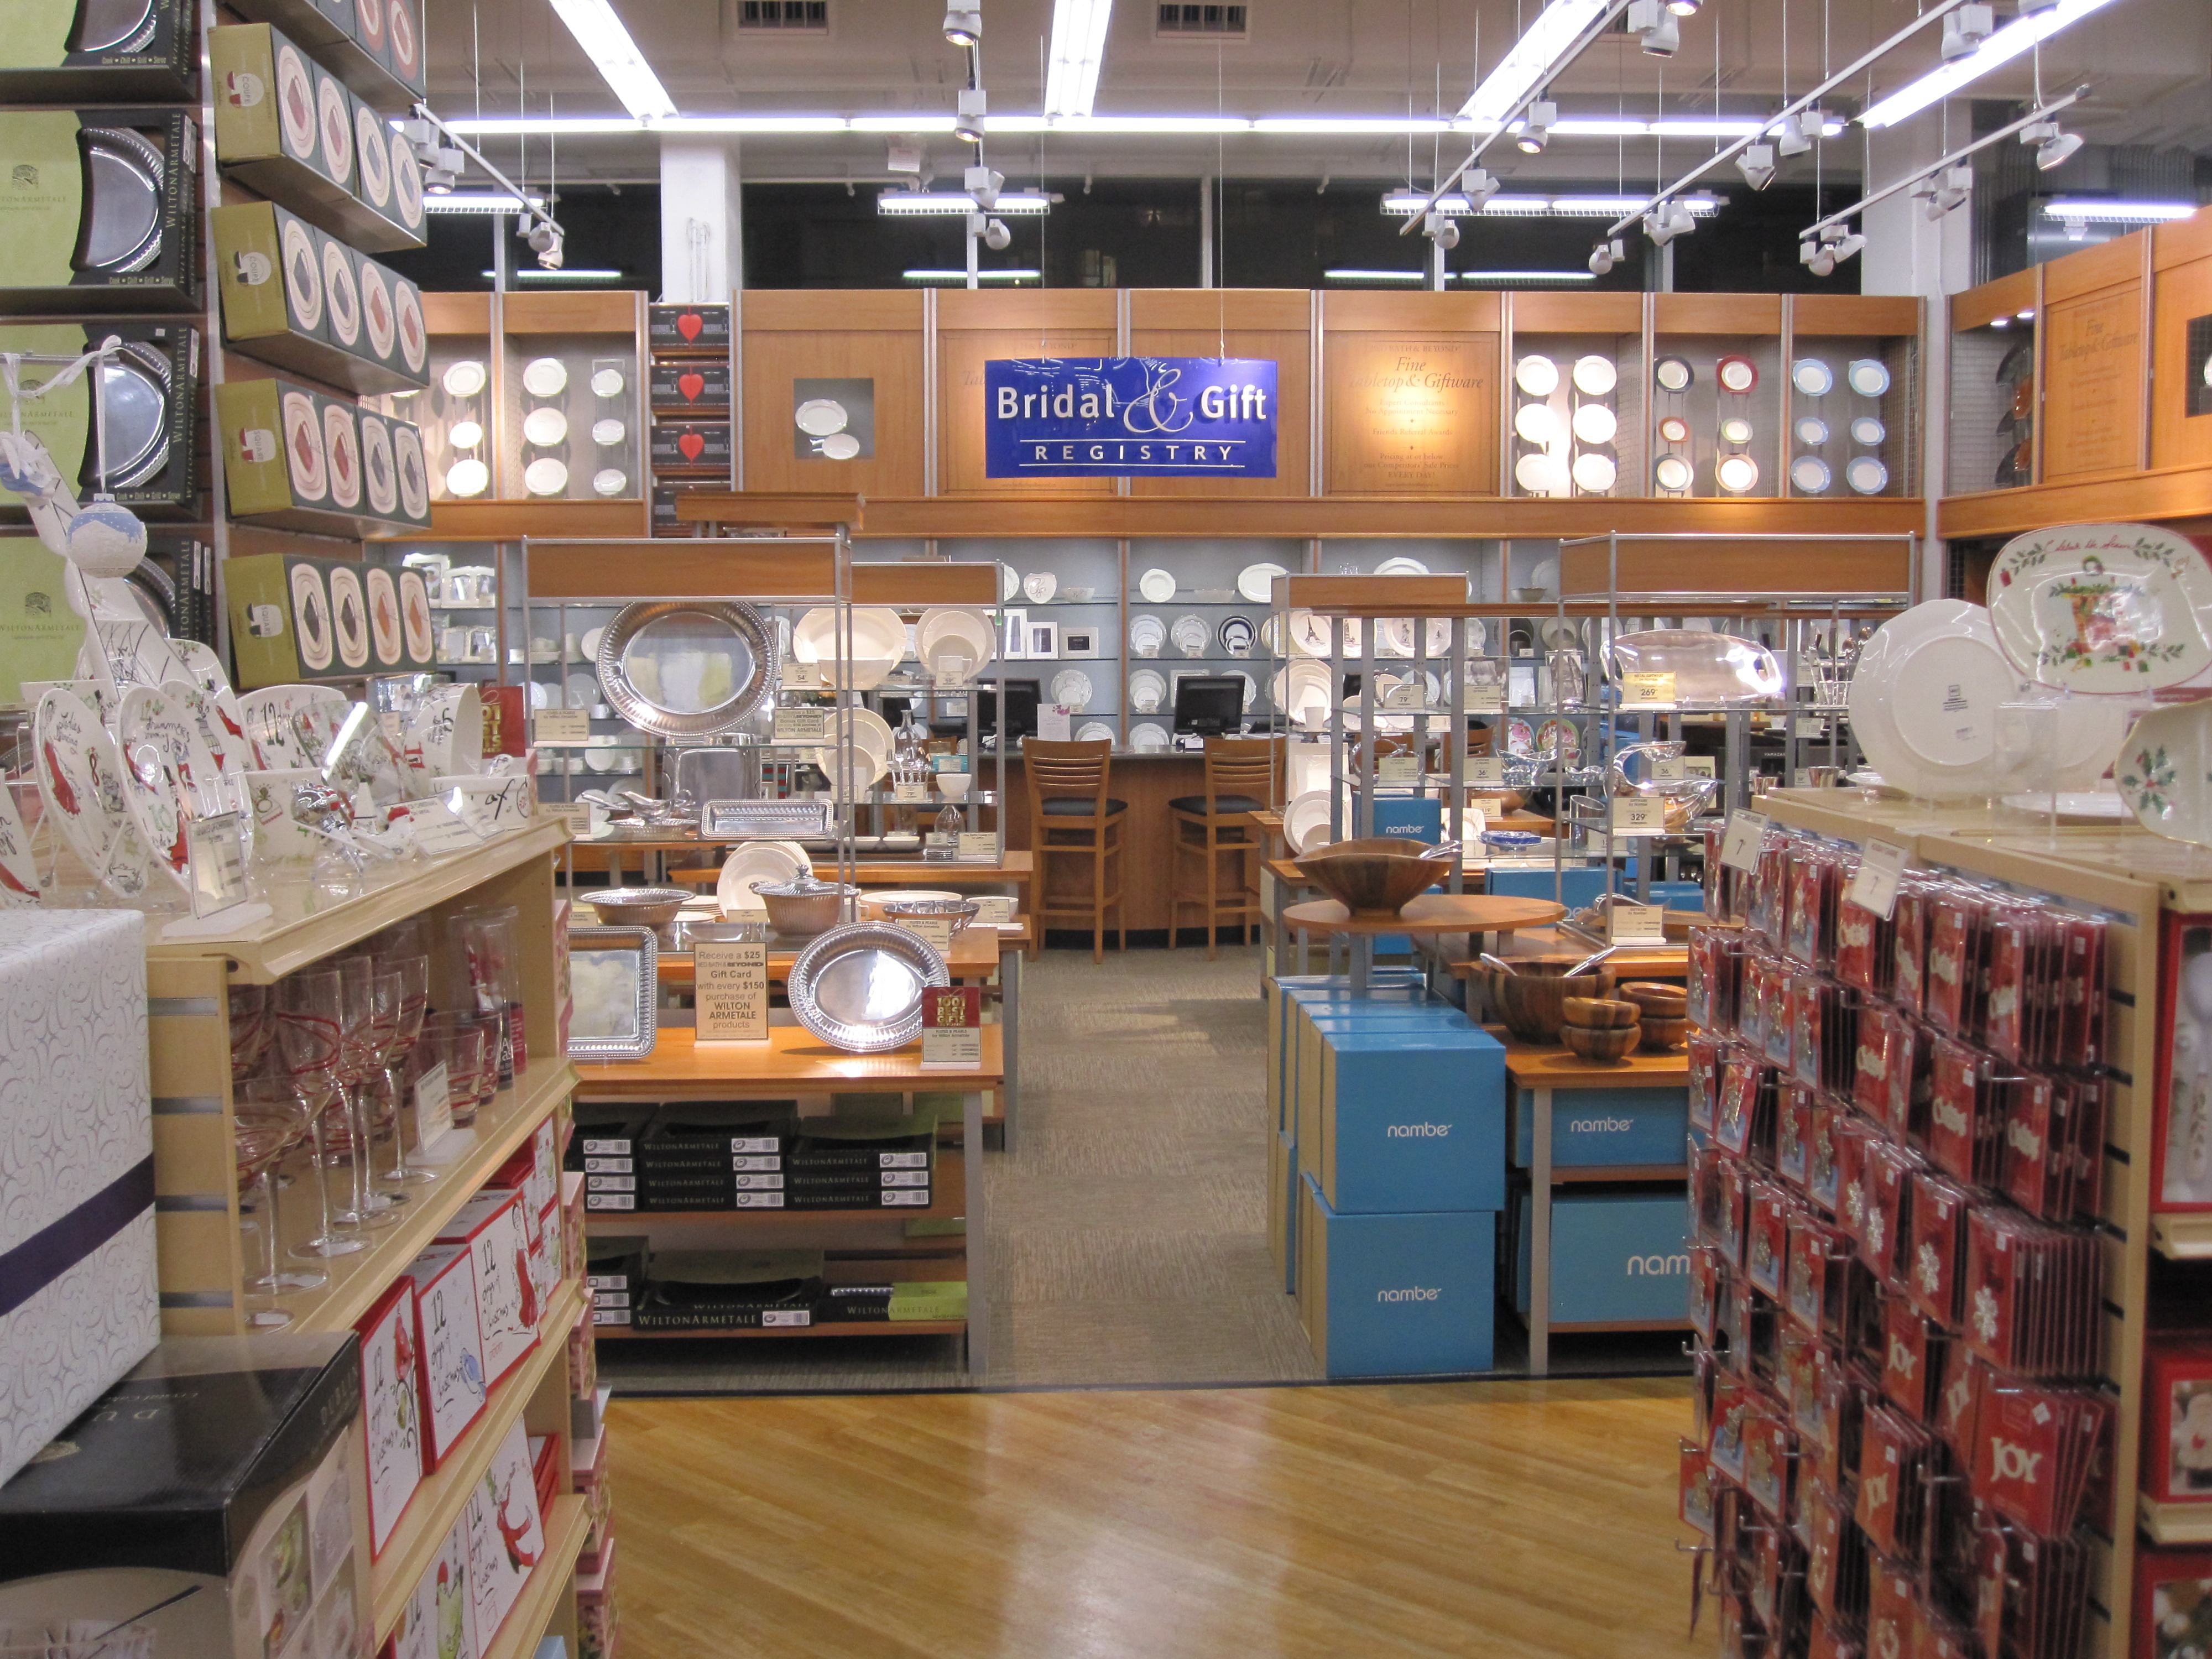 The wedding and gift registry section in the new store.